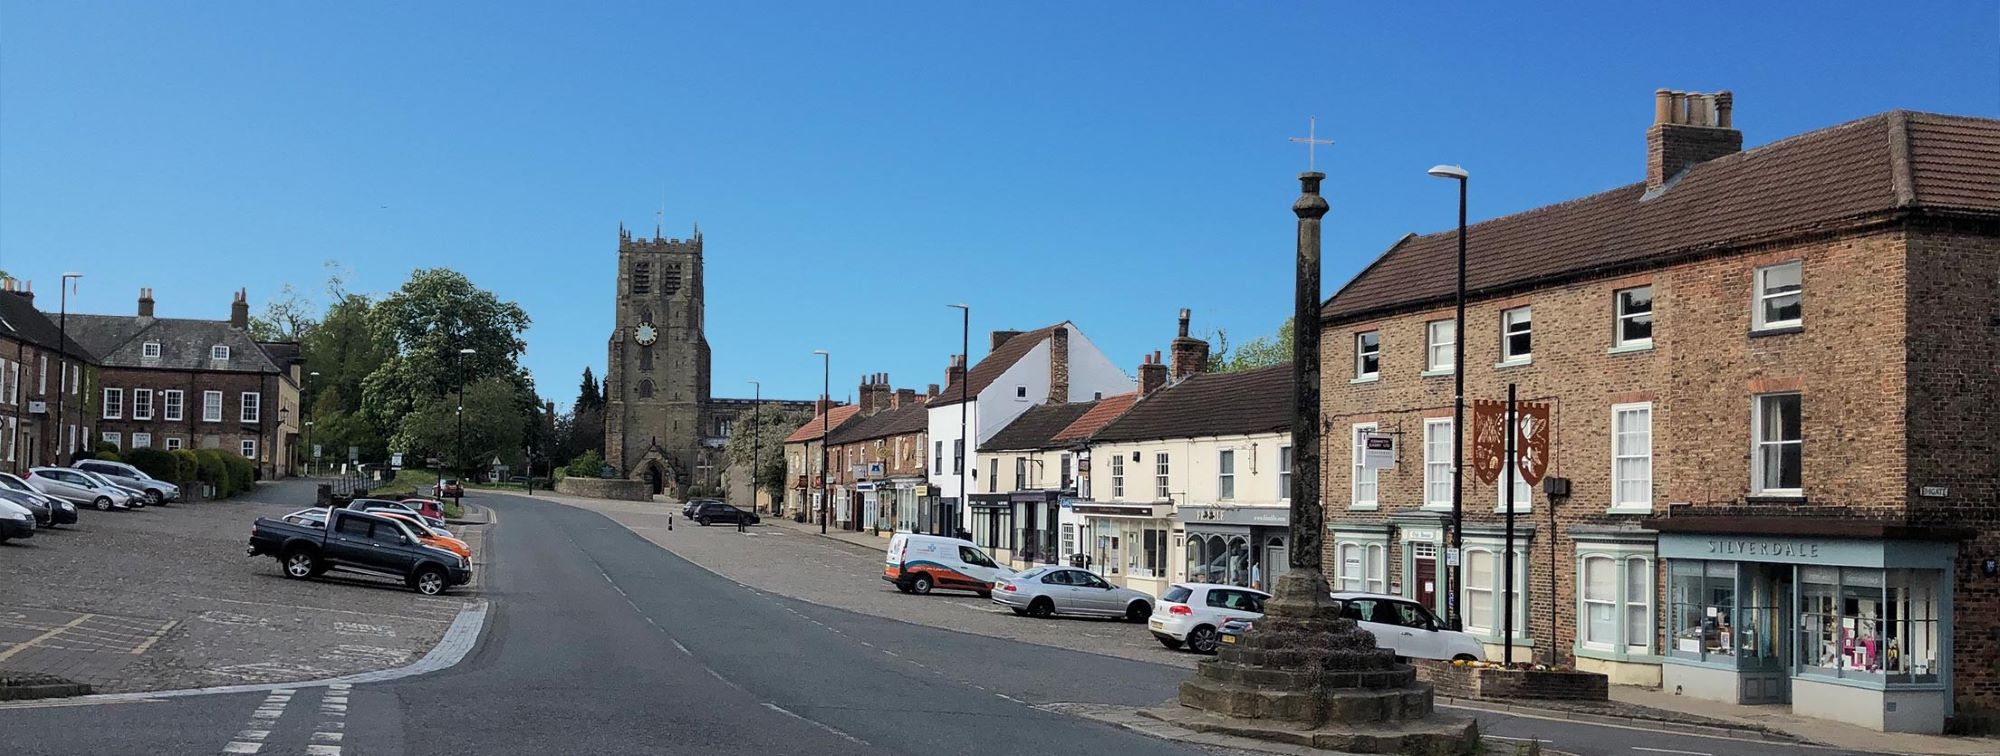 Bedale Market Cross, Church and Bedale Halll